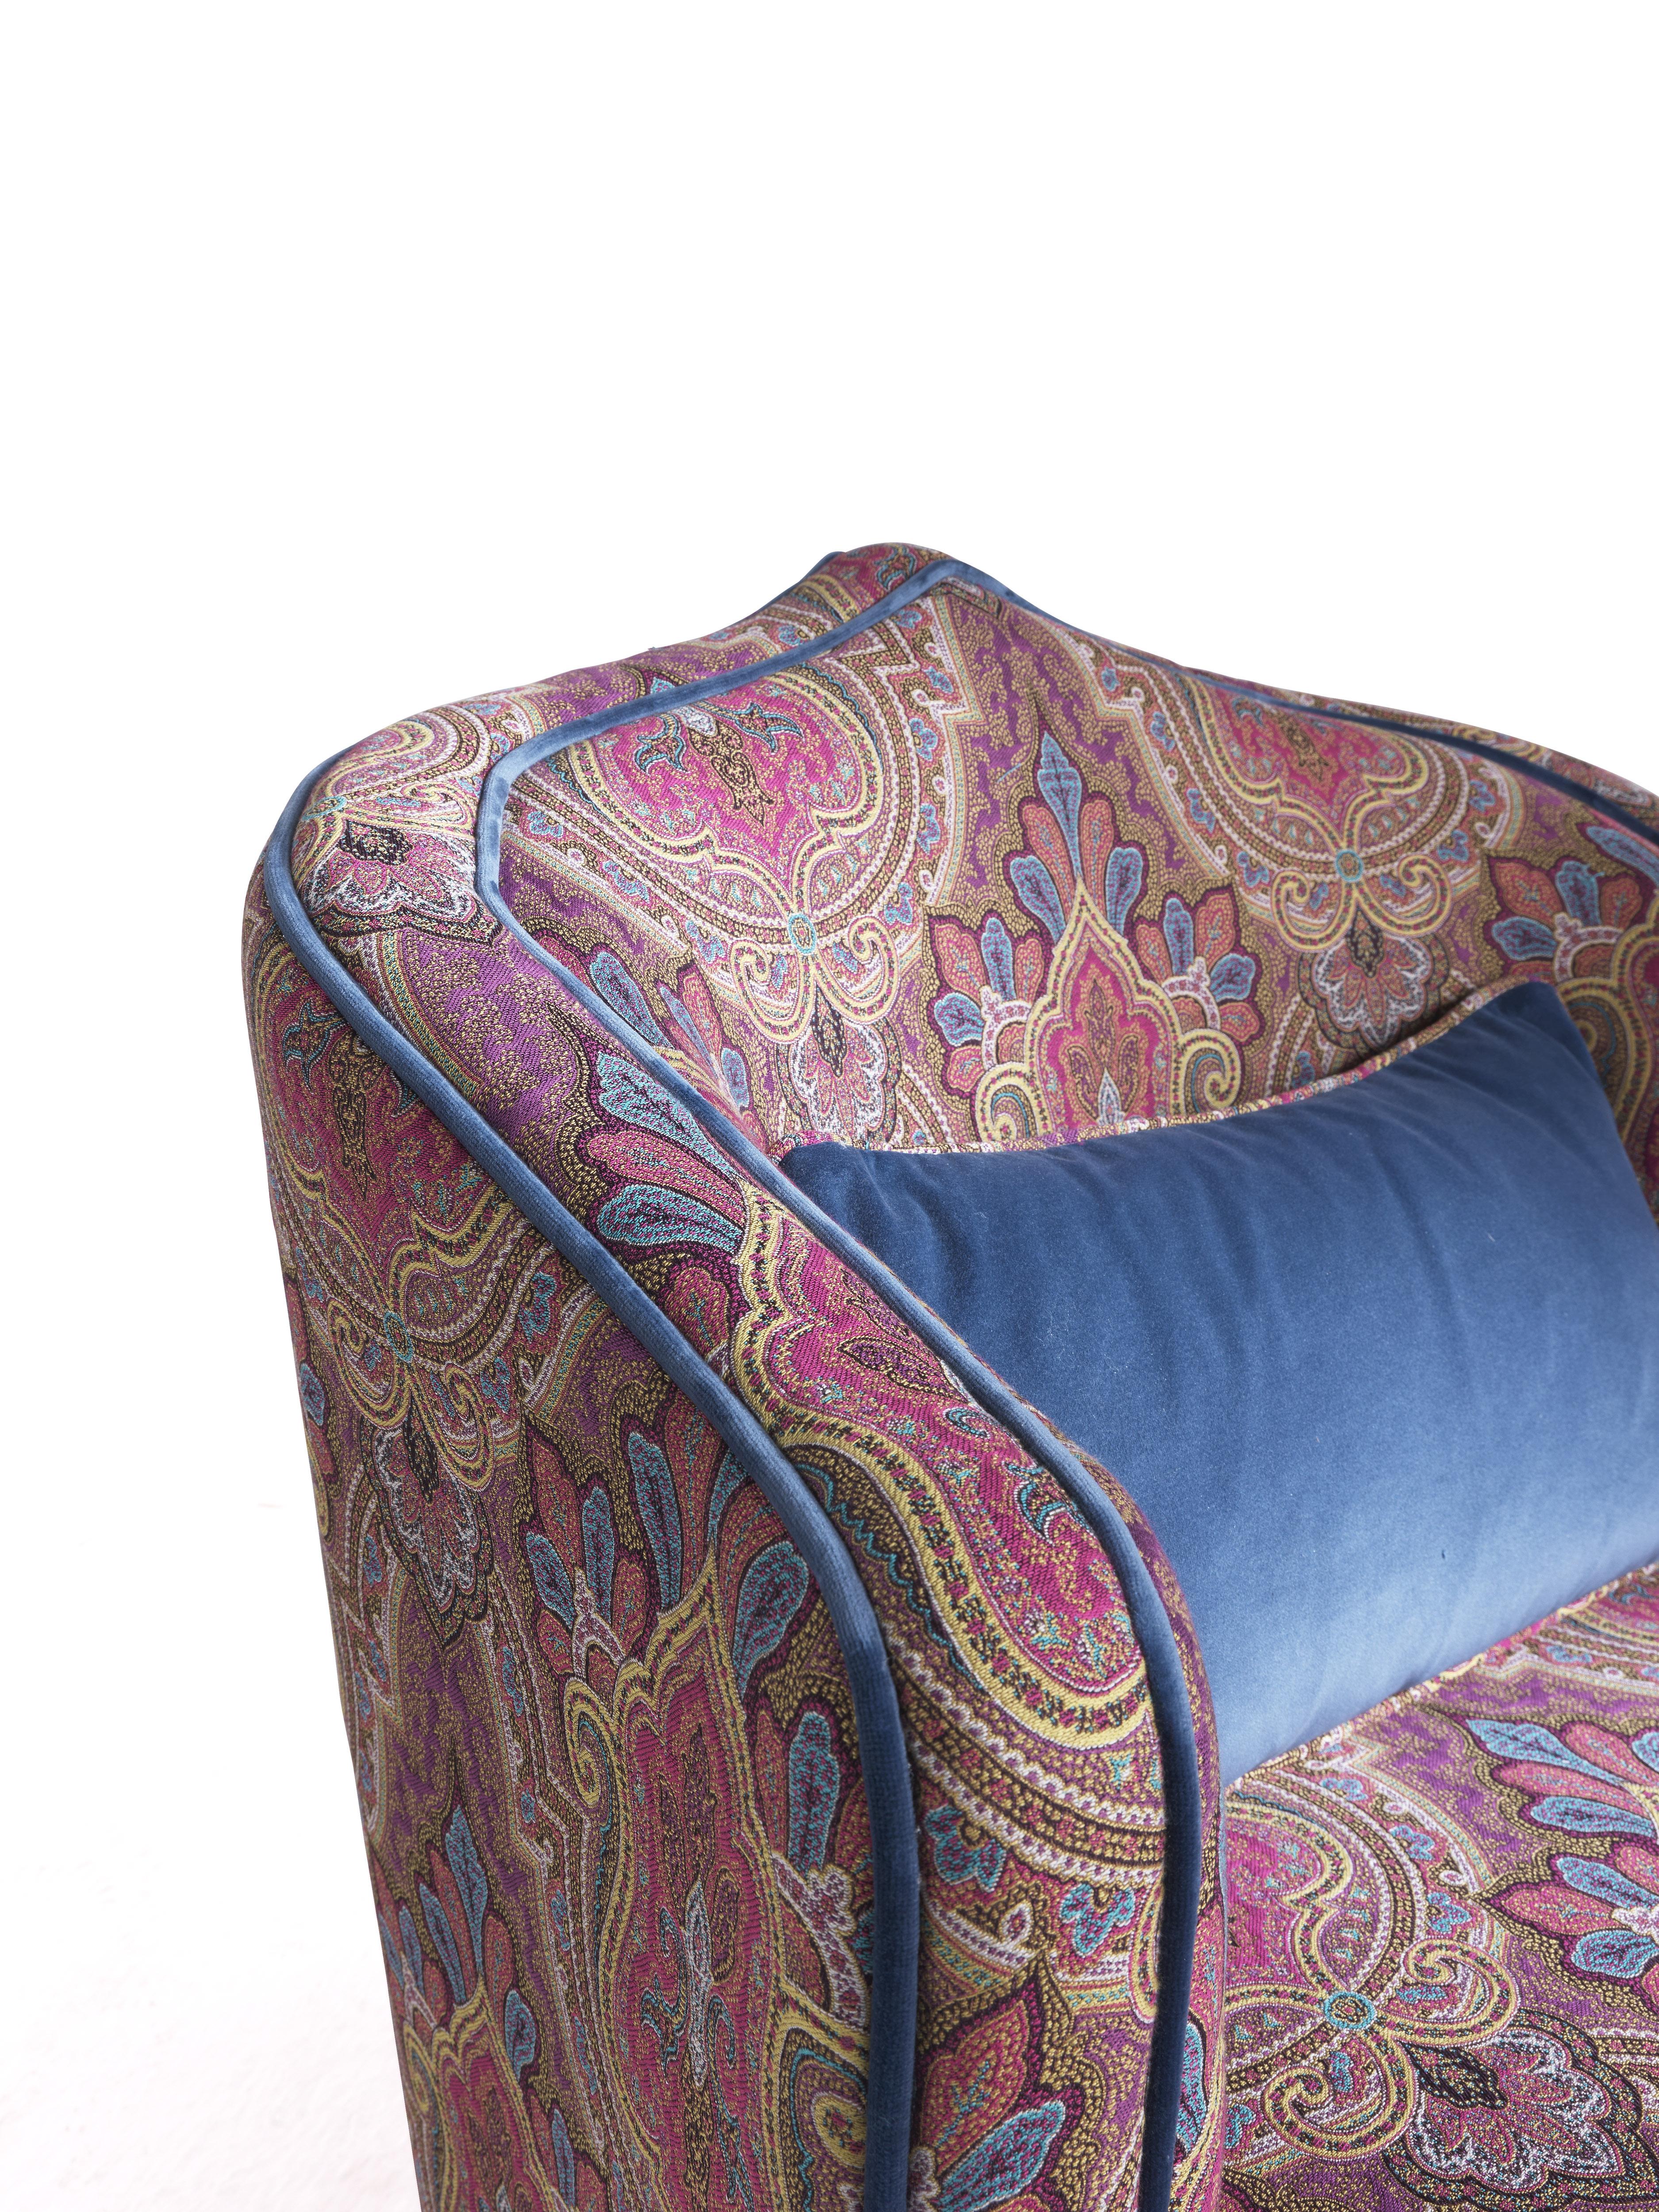 Italian 21st Century Amina Small Armchair in Fabric by Etro Home Interiors For Sale